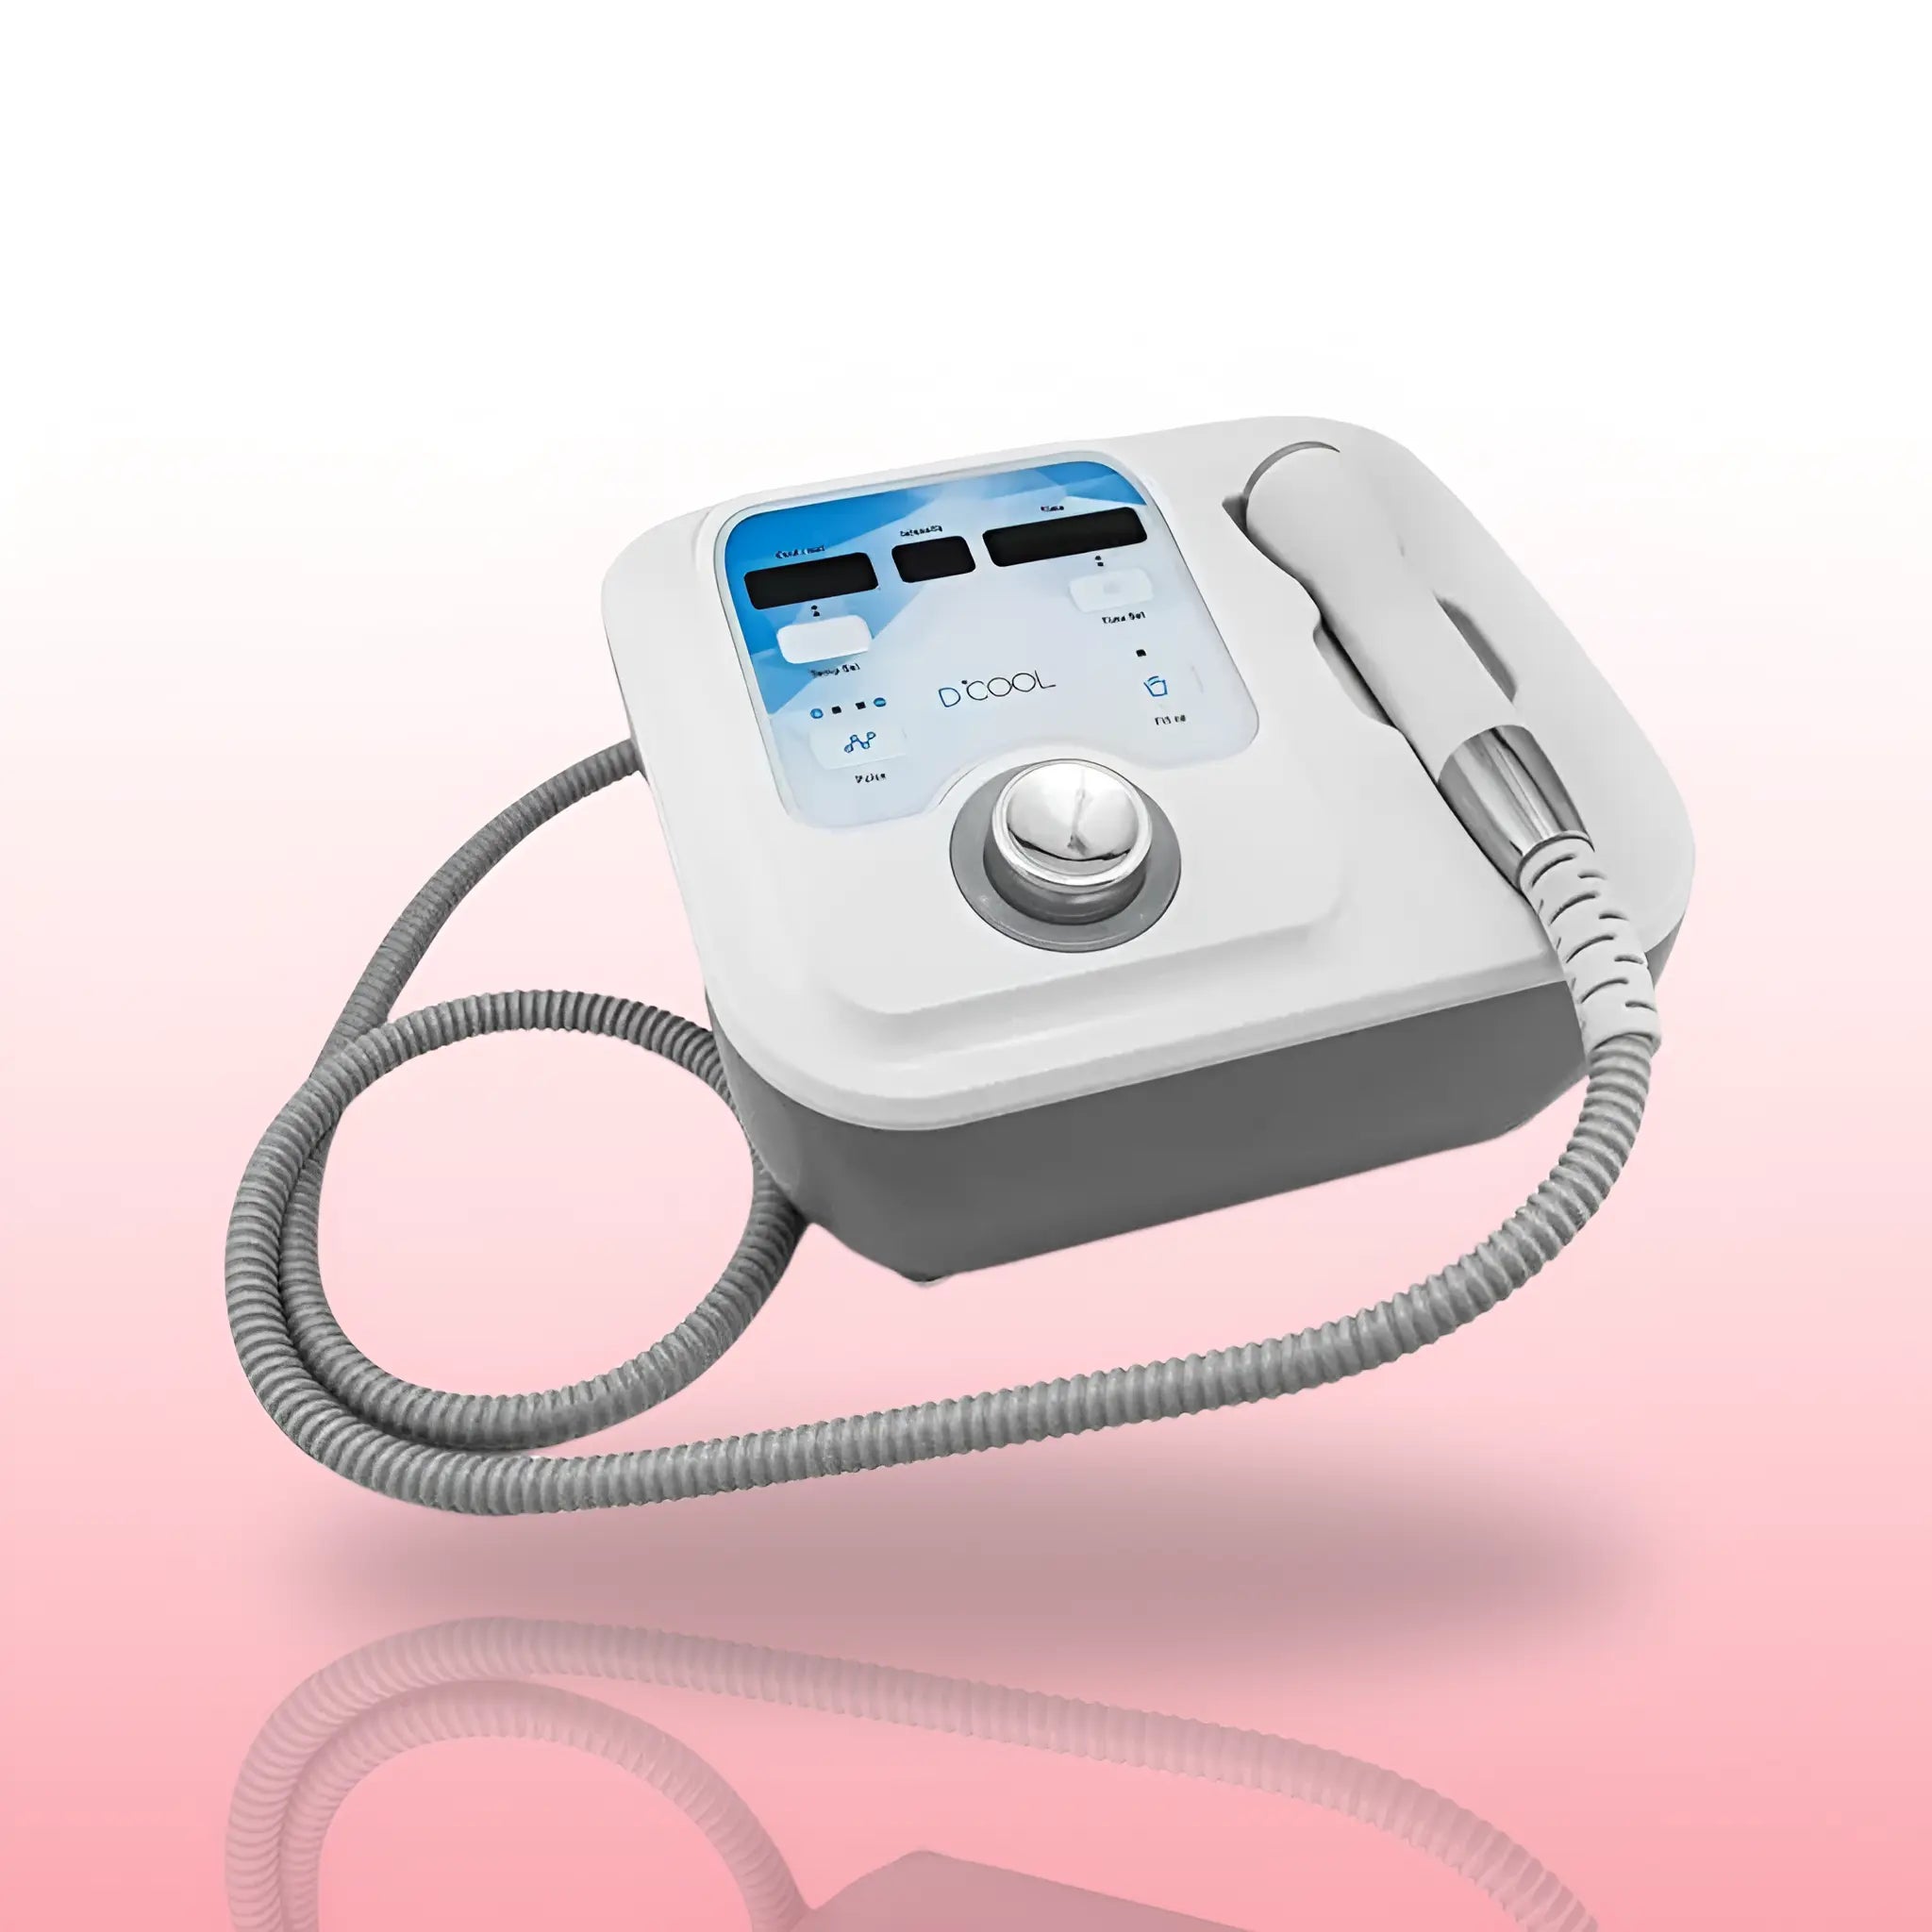 PORTABLE COOL & HOT EMS FOR SKIN TIGHTENING